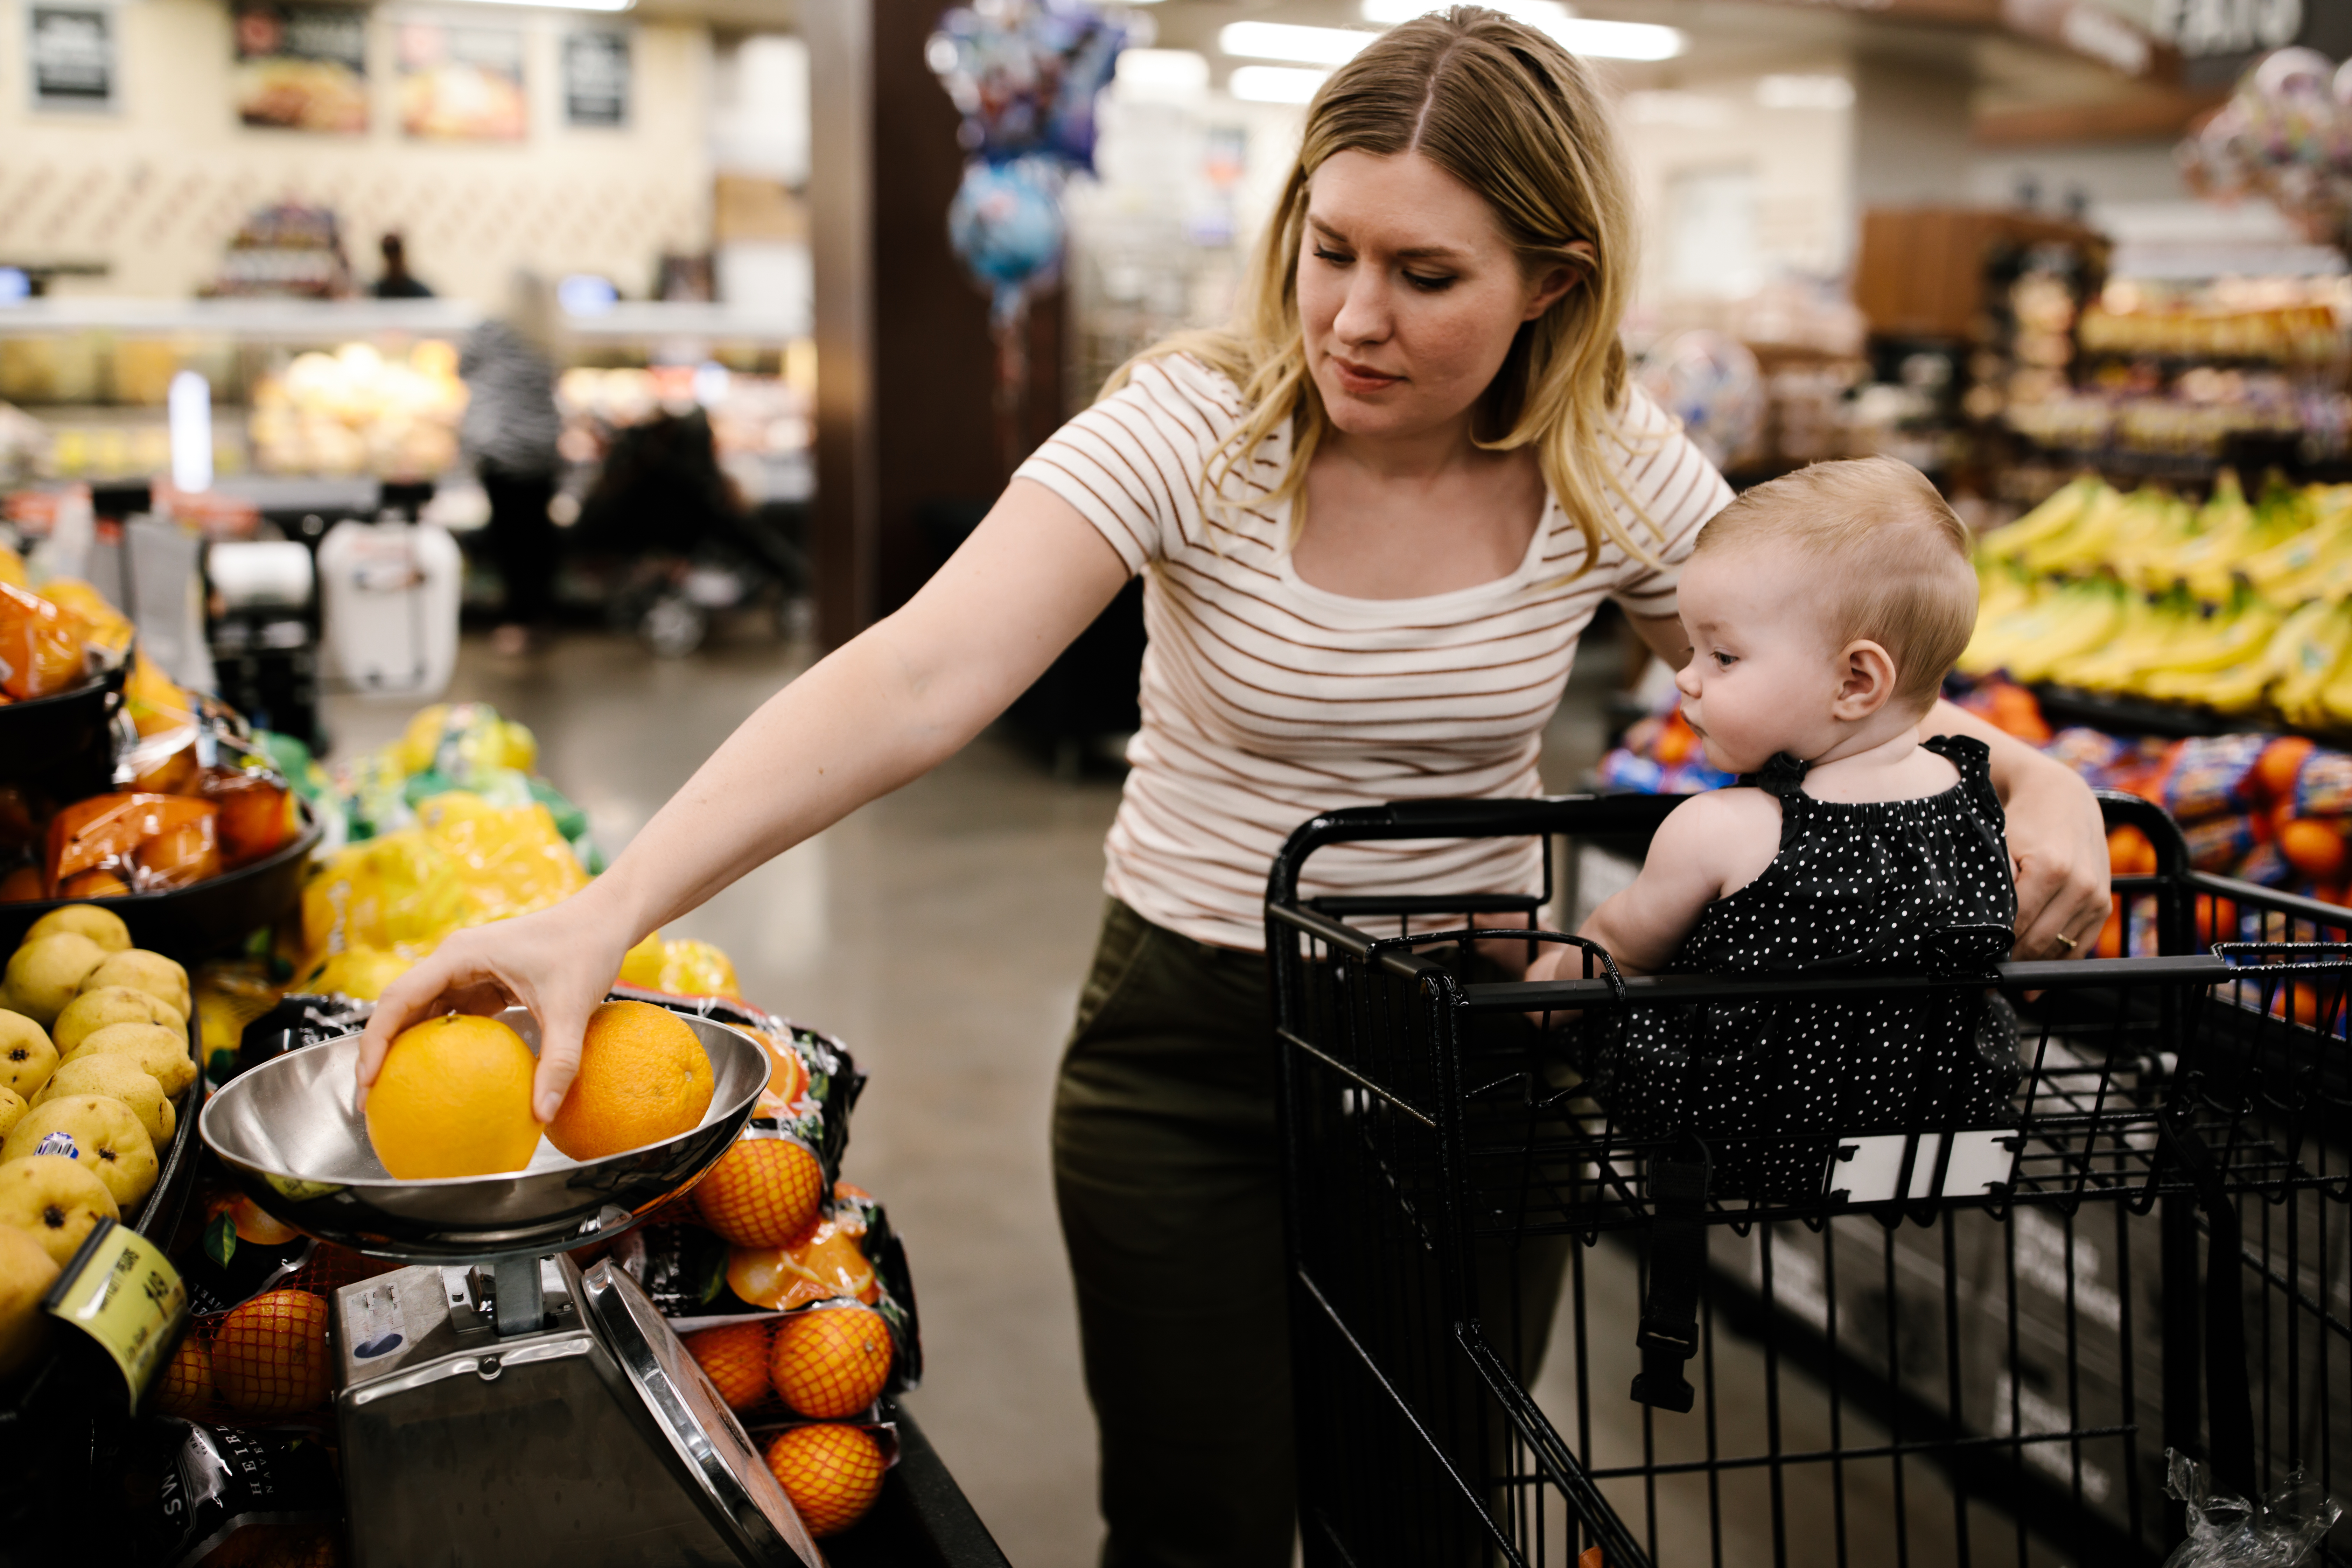 Mother with her little daughter buying fresh fruit at the grocery store | Source: Getty Images